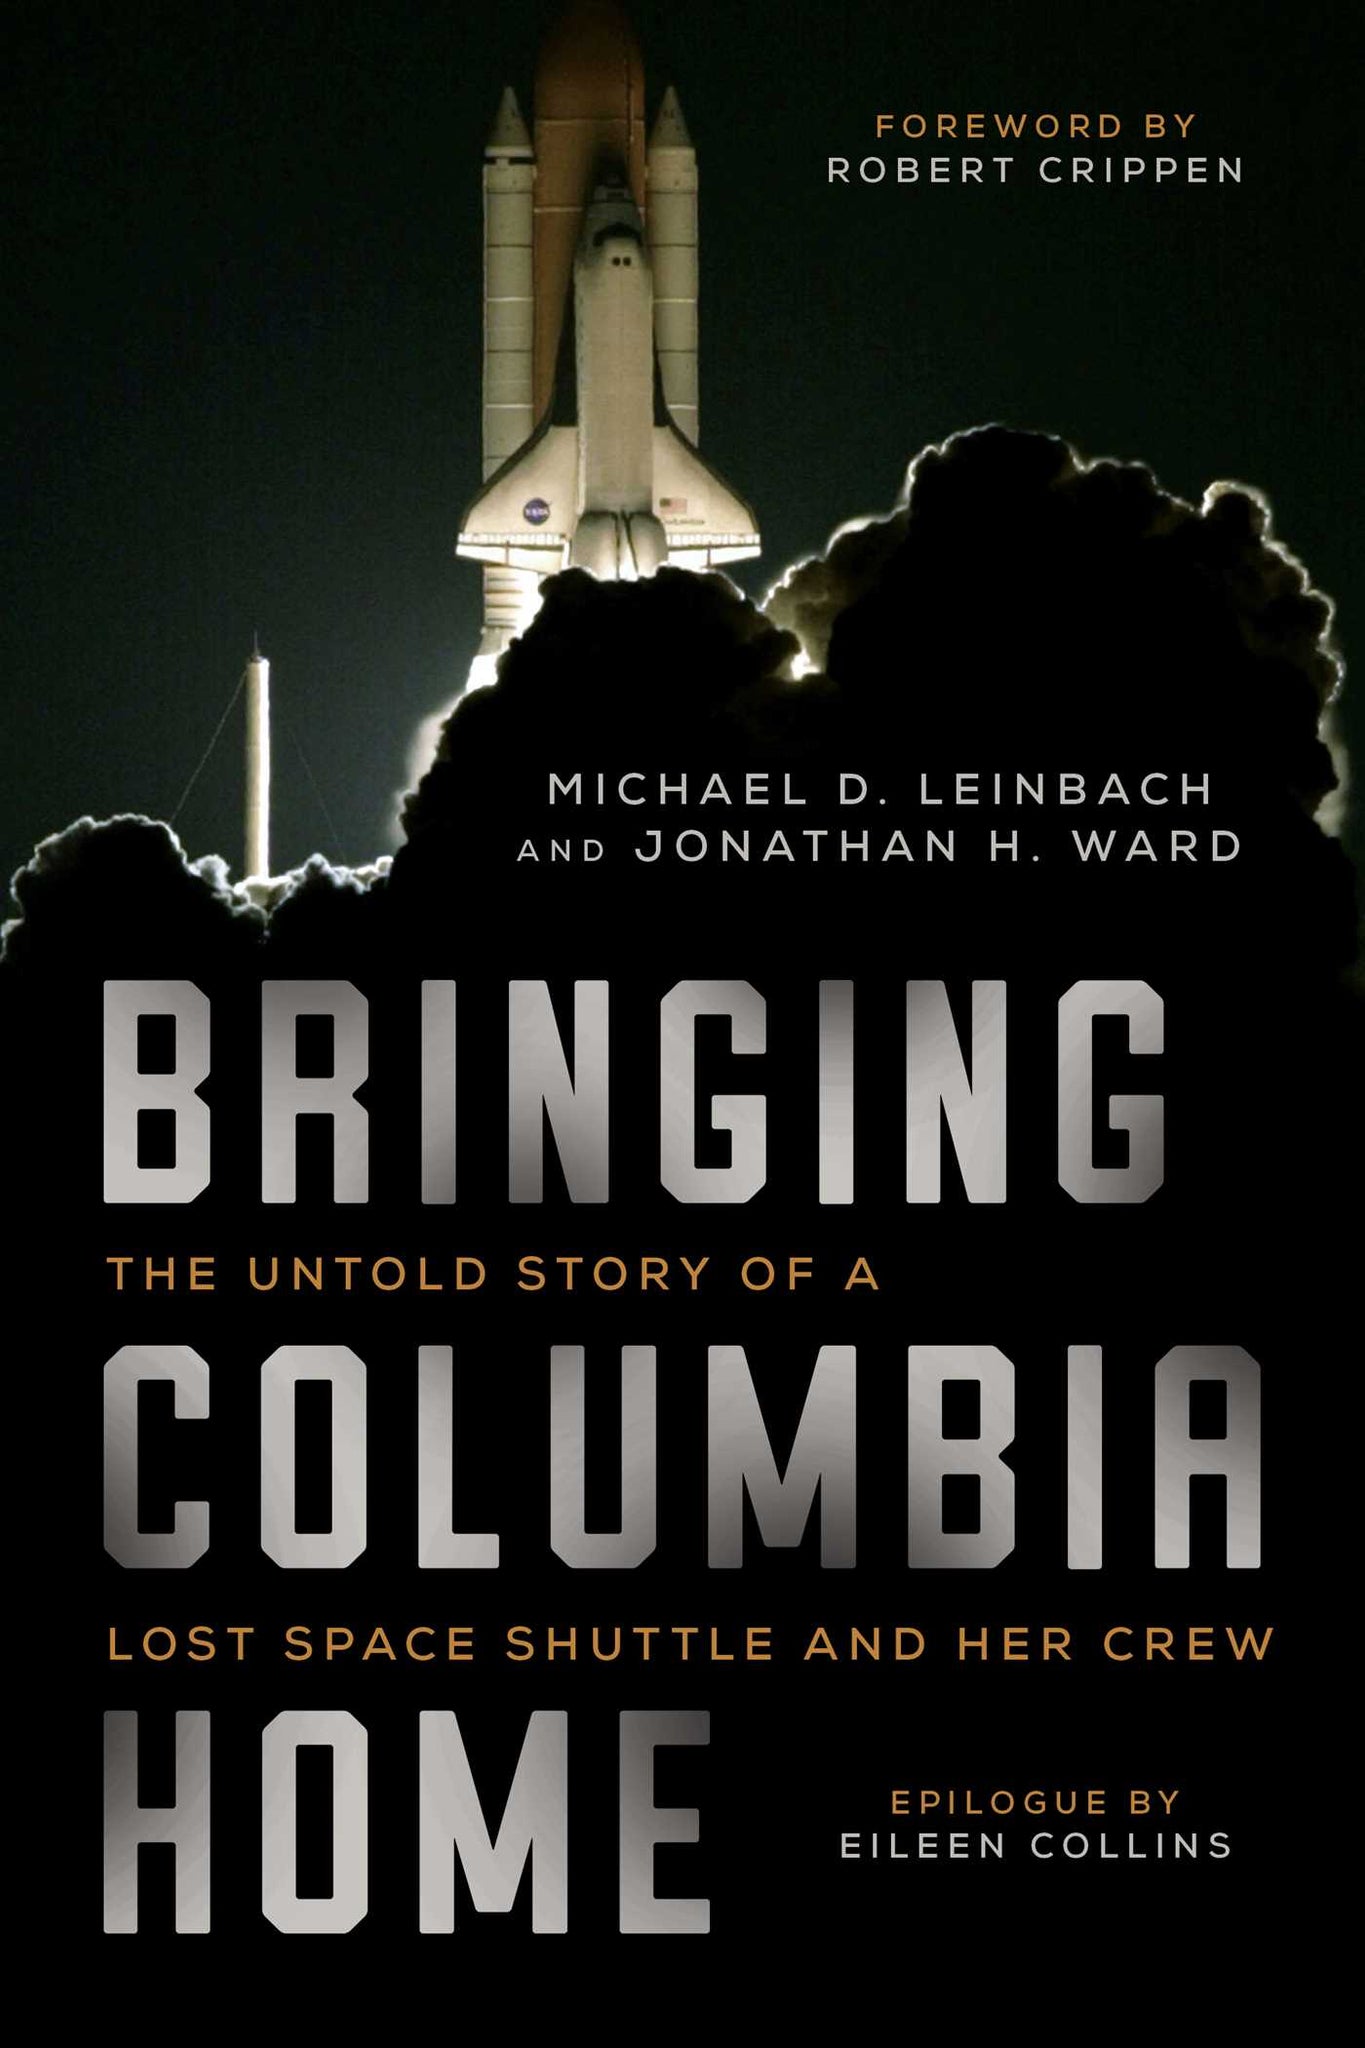 Bringing Columbia Home : The Untold Story of a Lost Space Shuttle and Her Crew